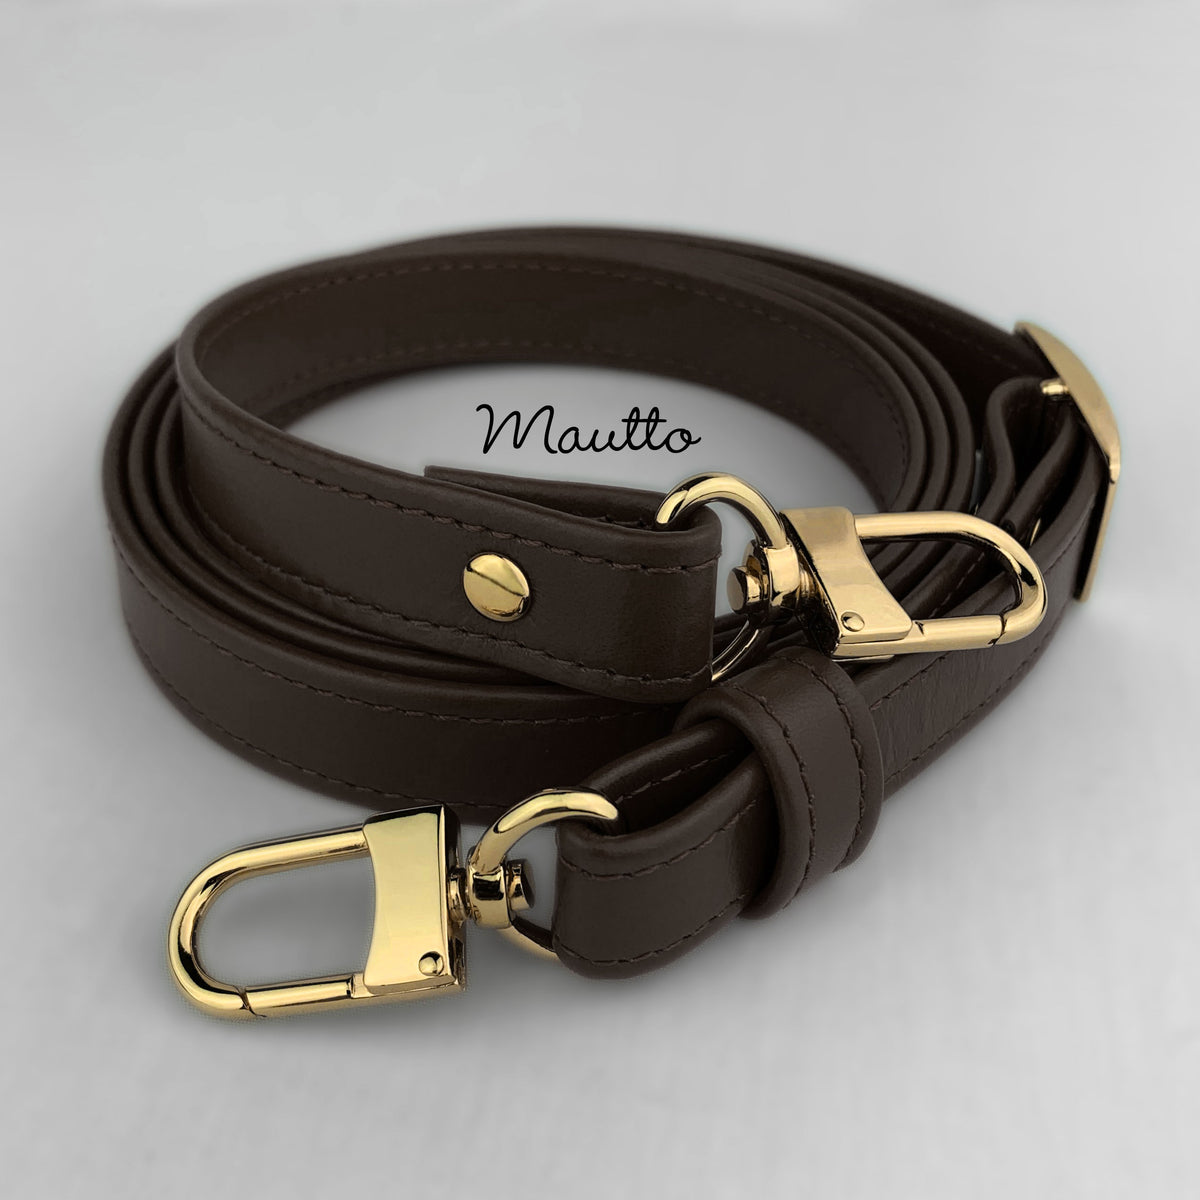 Leather Top Handle for LV Odeon PM / MM Bag & more - 3/4 inch Wide - Gold  U-shape #16LG Clasps, Replacement Purse Straps & Handbag Accessories -  Leather, Chain & more